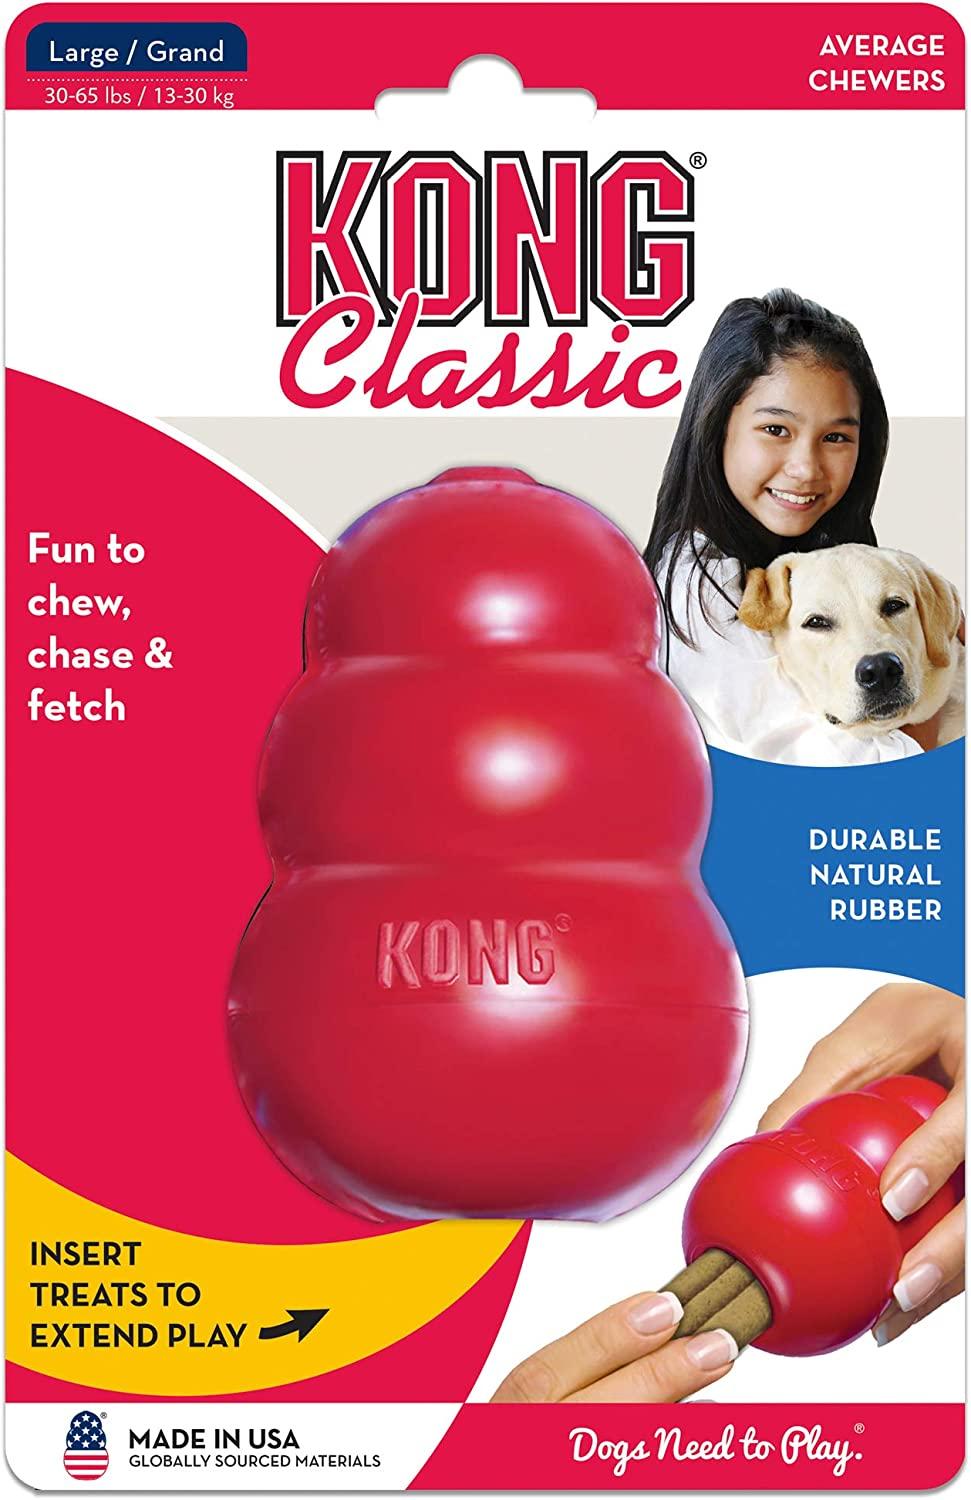 KONG WOBBLER DOG TOY SNACK FOOD DISPENSER EXTRA LARGE 2 LBS